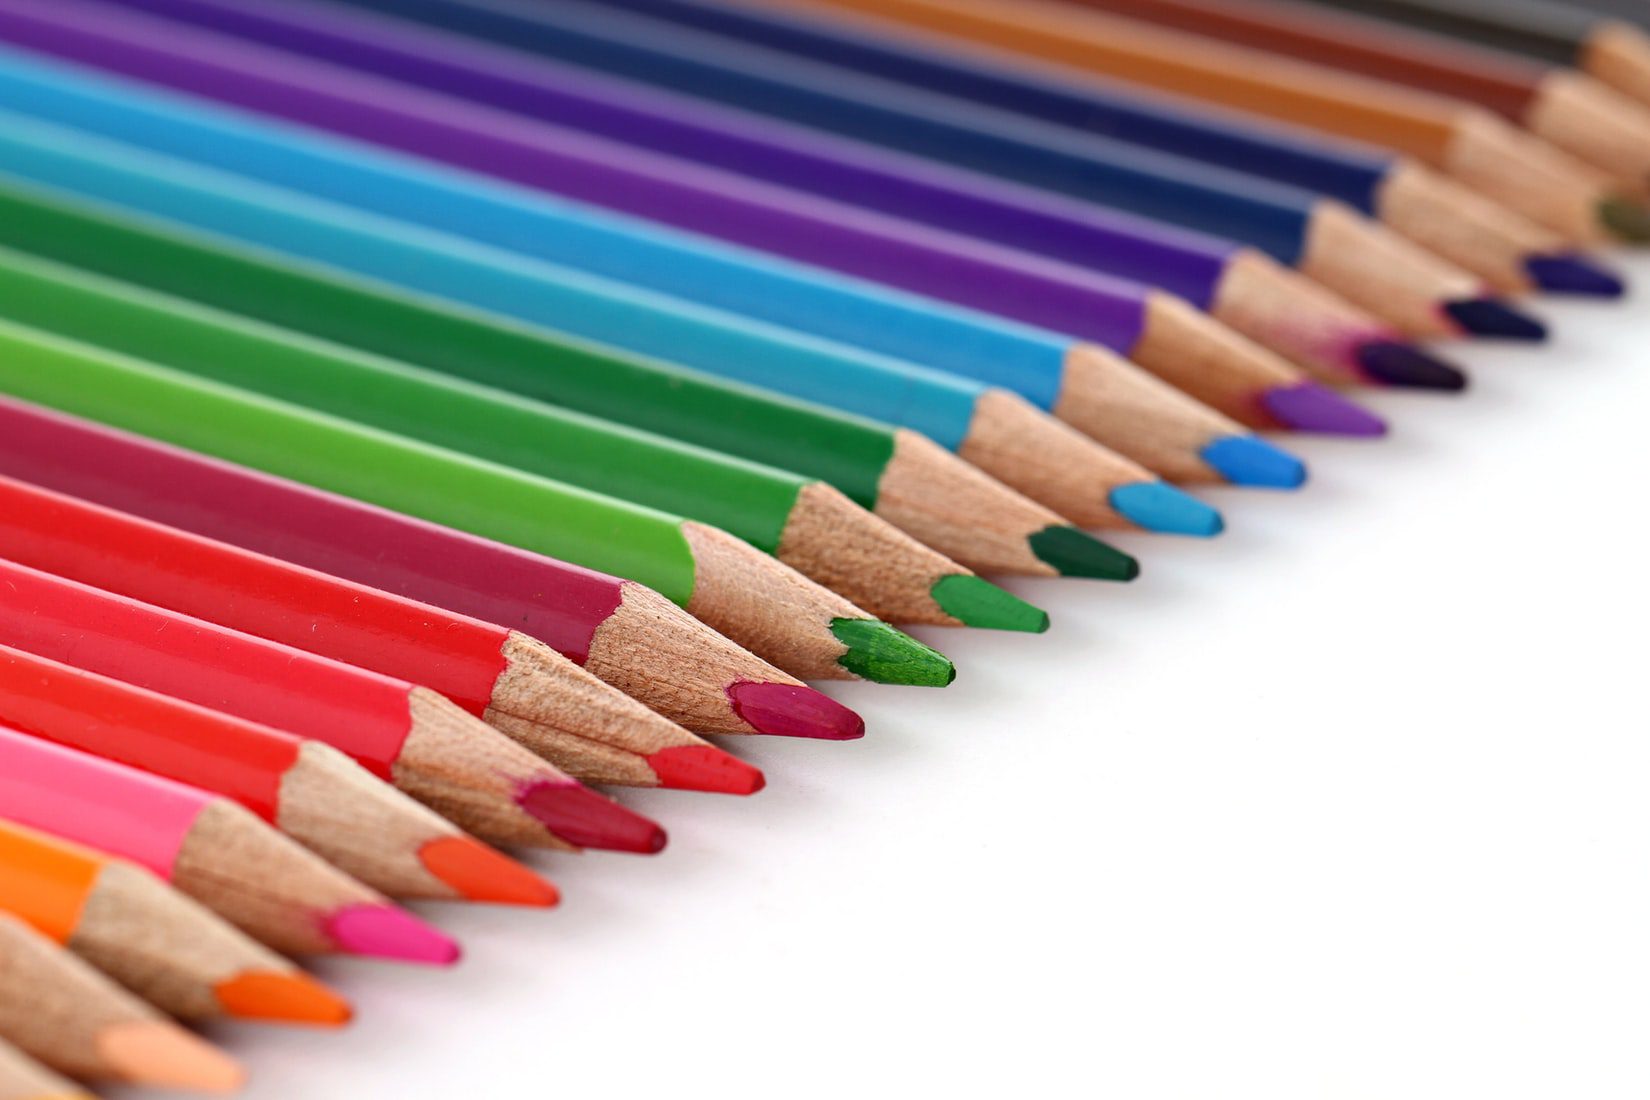 Colored pencils lined up, ready to be used with the right audience